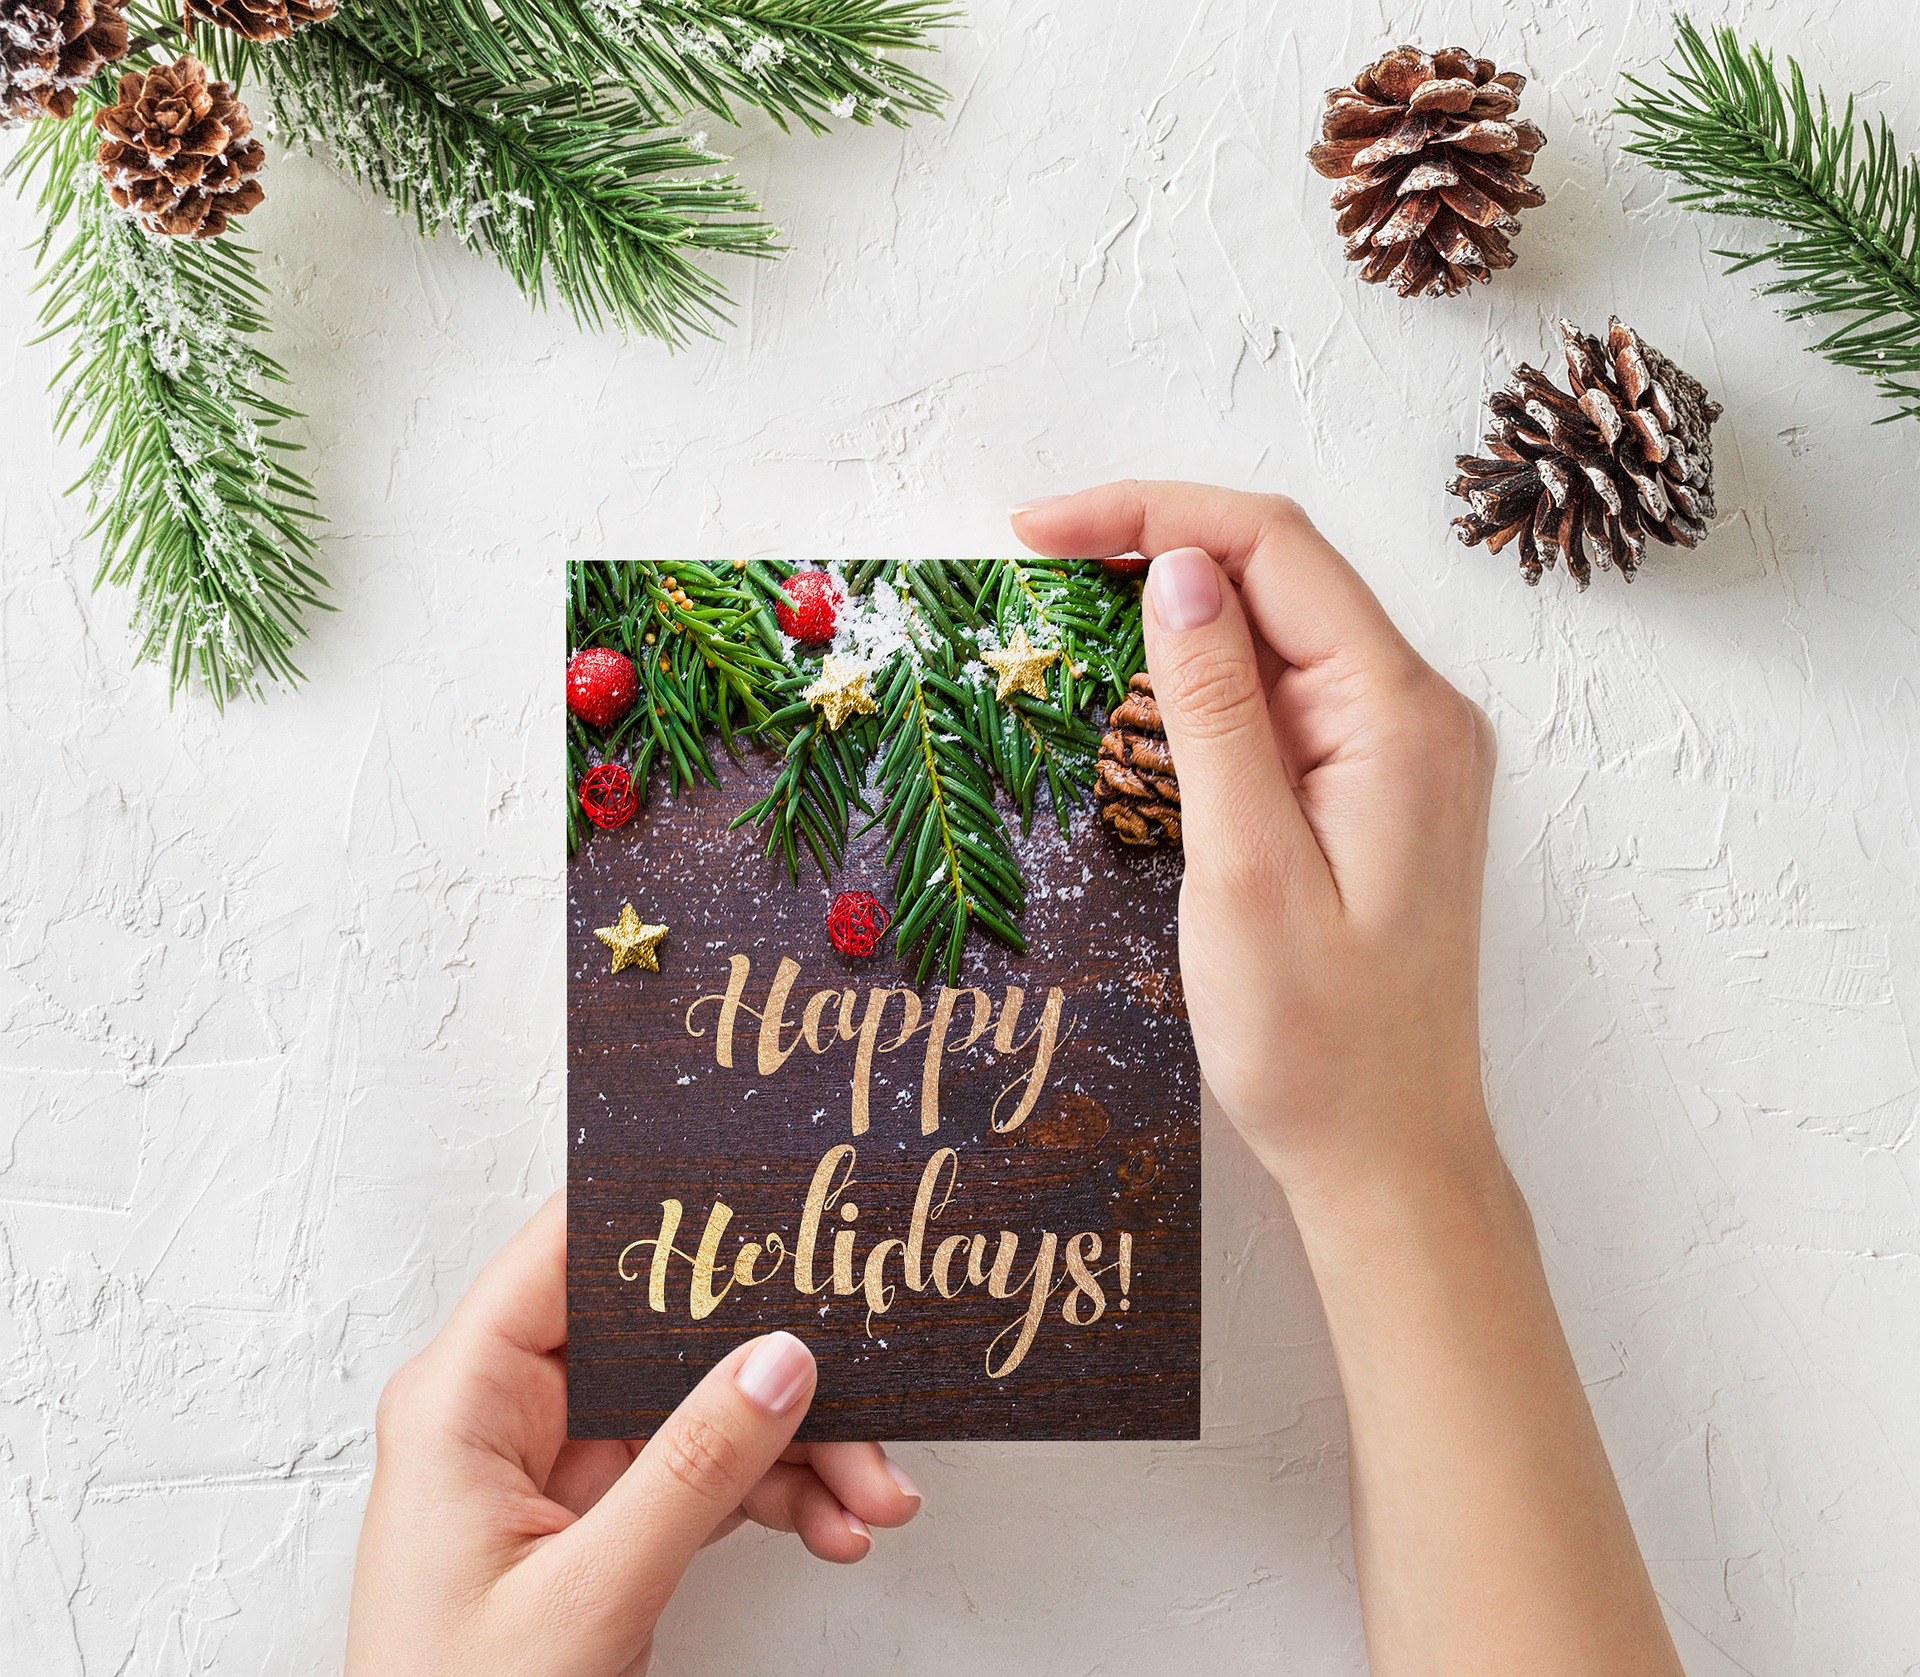 Why a Personalized Corporate Holiday Card Is Still Greatly Appreciated